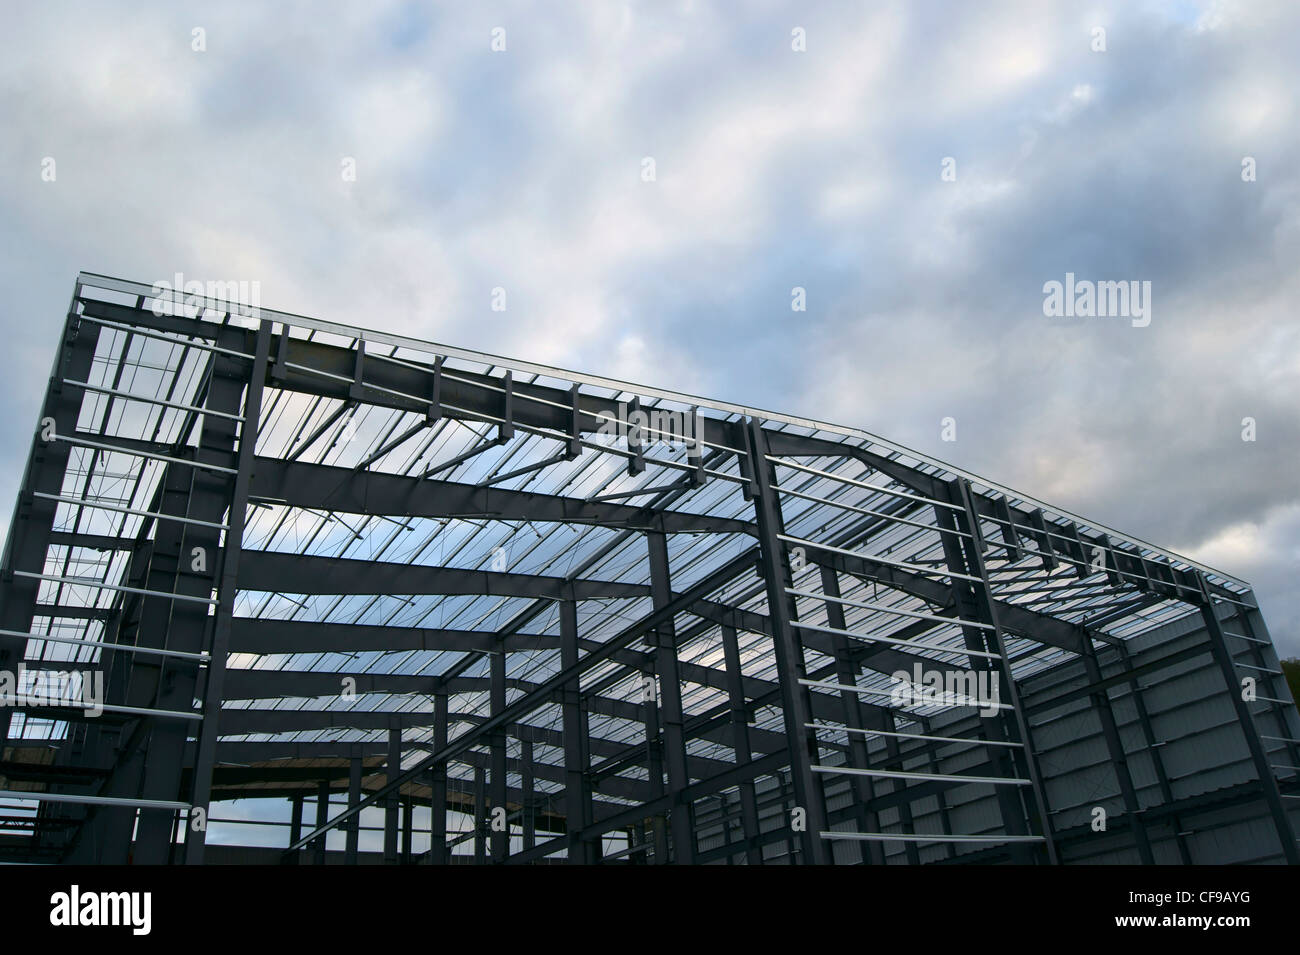 Low-angle view of steel girders in a building under construction with clouds in the background, Belfast, Maine. Stock Photo